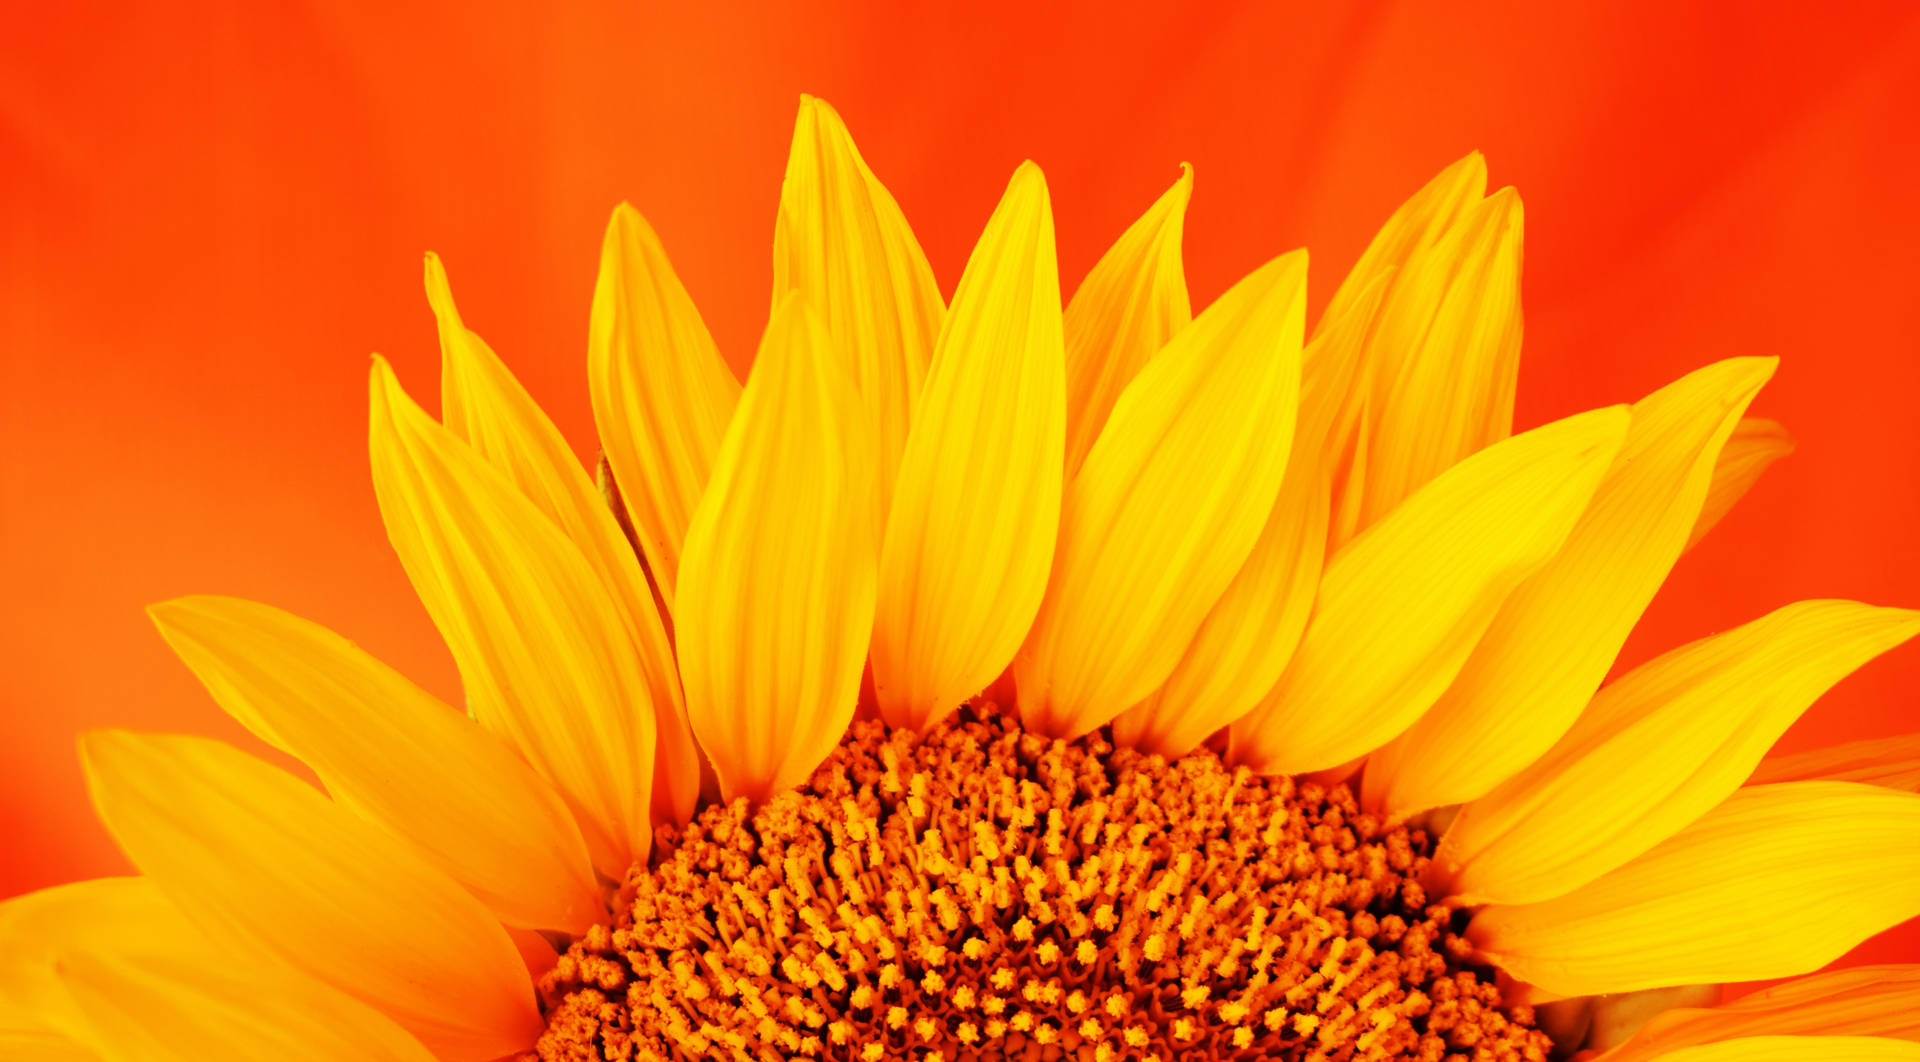 Sunflower 5624X3112 Wallpaper and Background Image